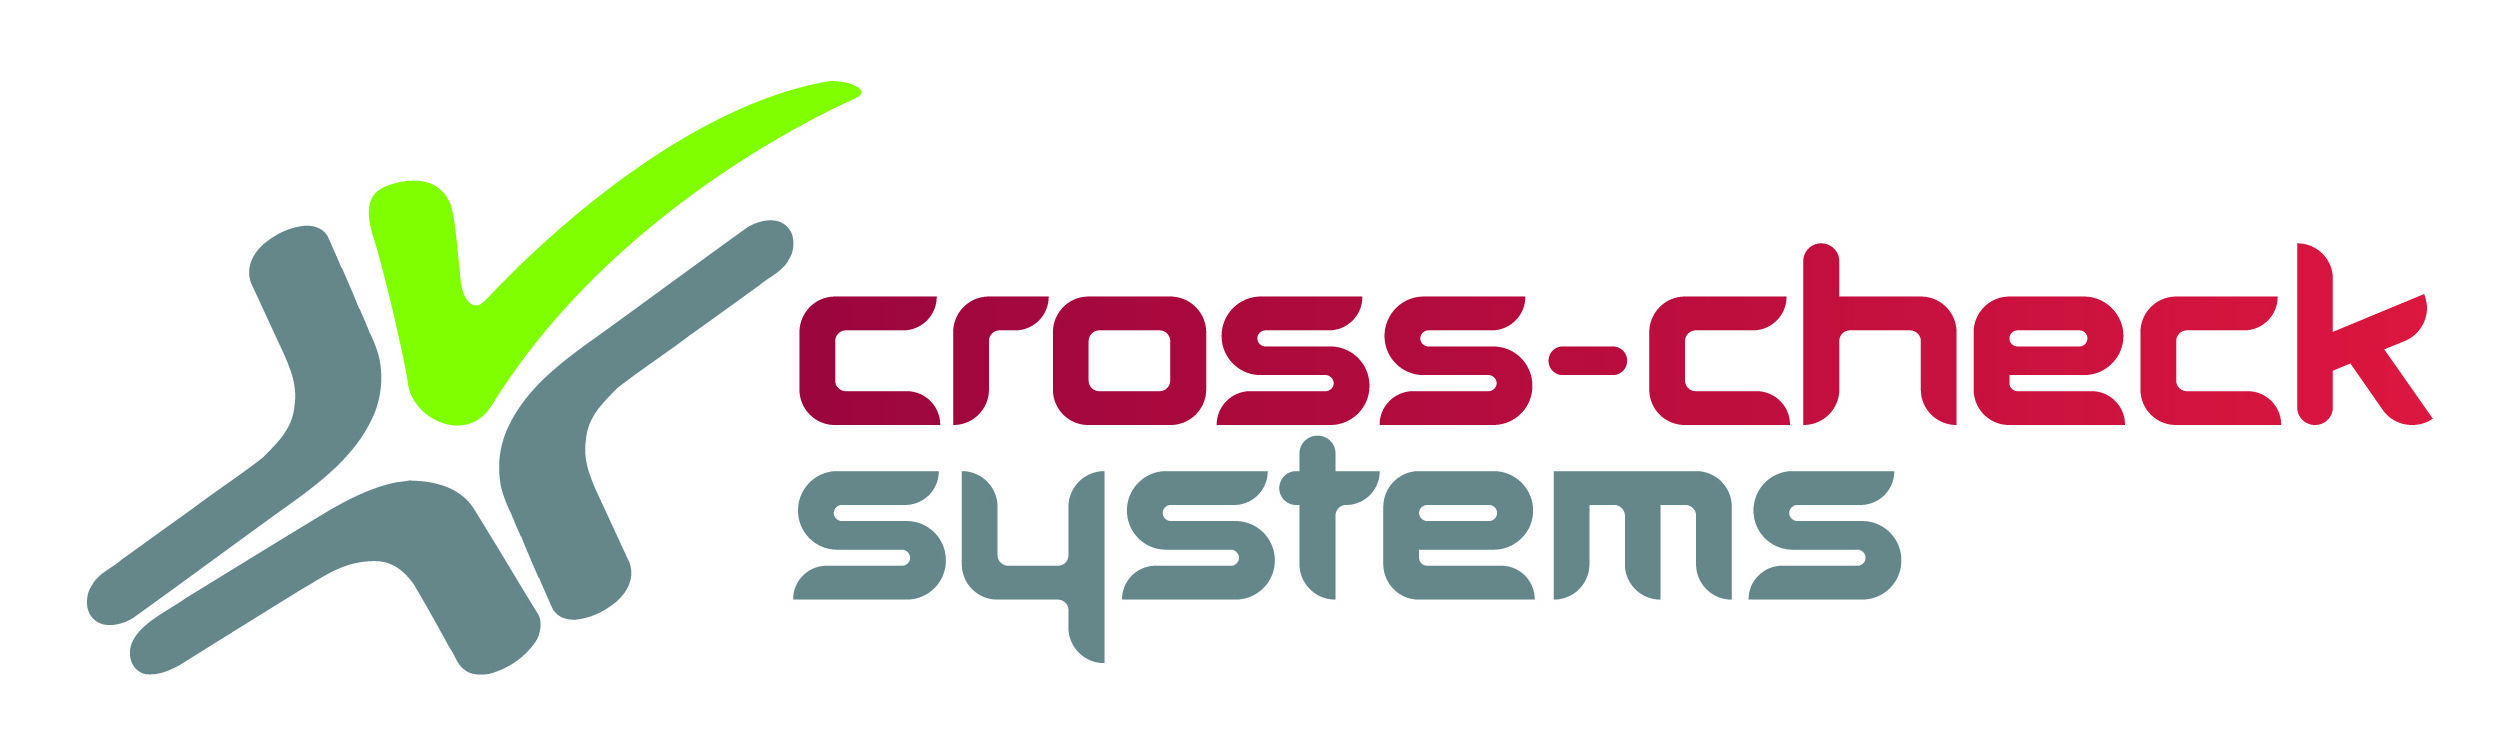 Cross-Check-Systems Logo, Stock Management, Inventory management, warehouse management, RFID tagging, RFID